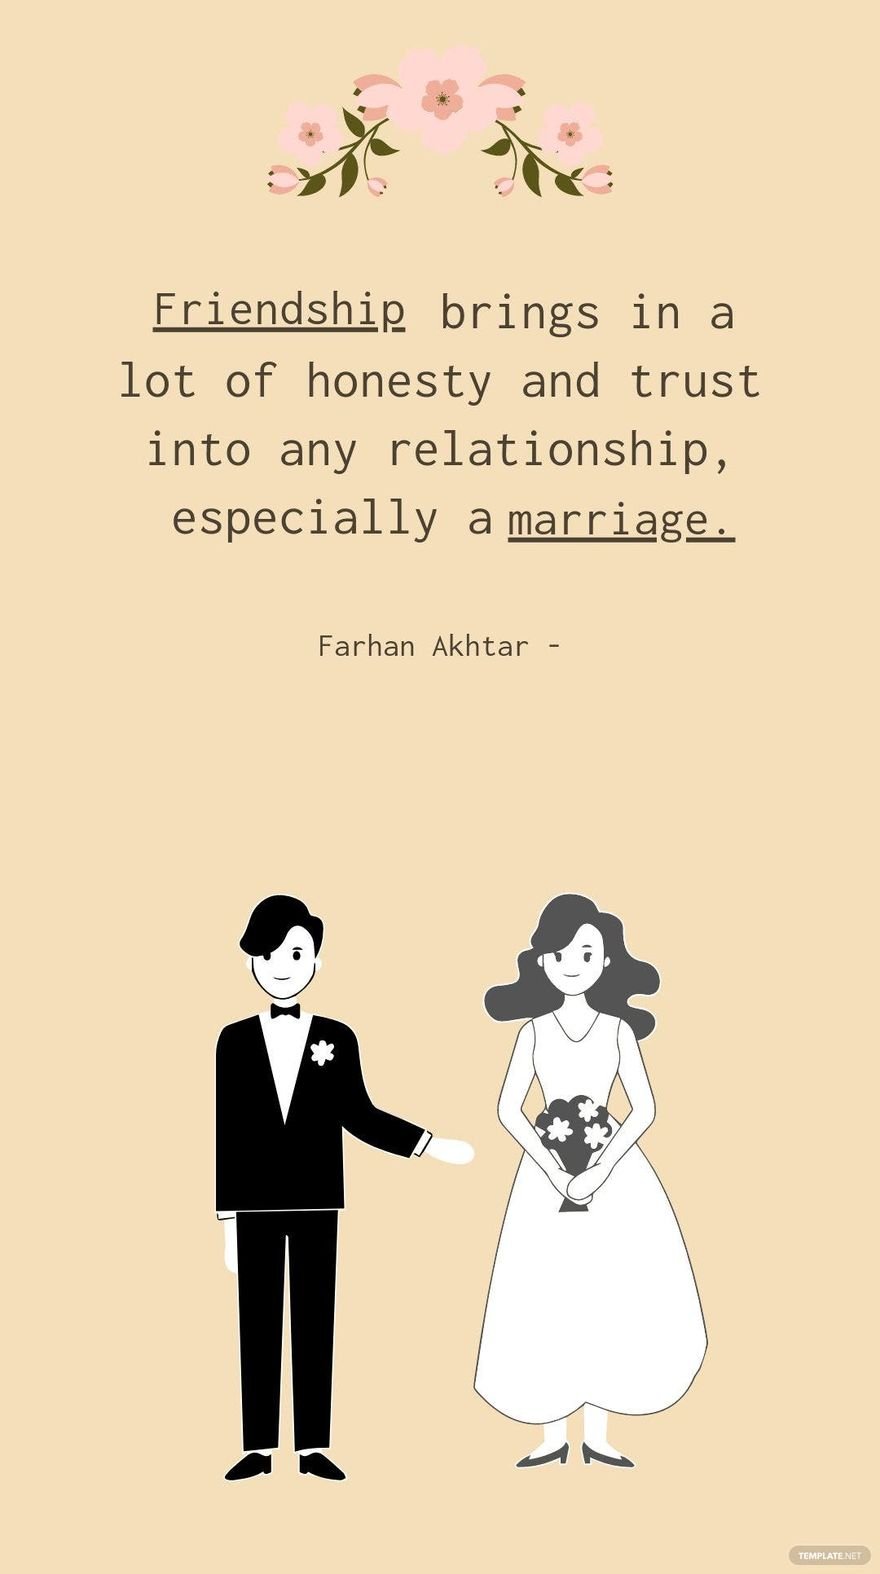 Farhan Akhtar - Friendship brings in a lot of honesty and trust into any relationship, especially a marriage.